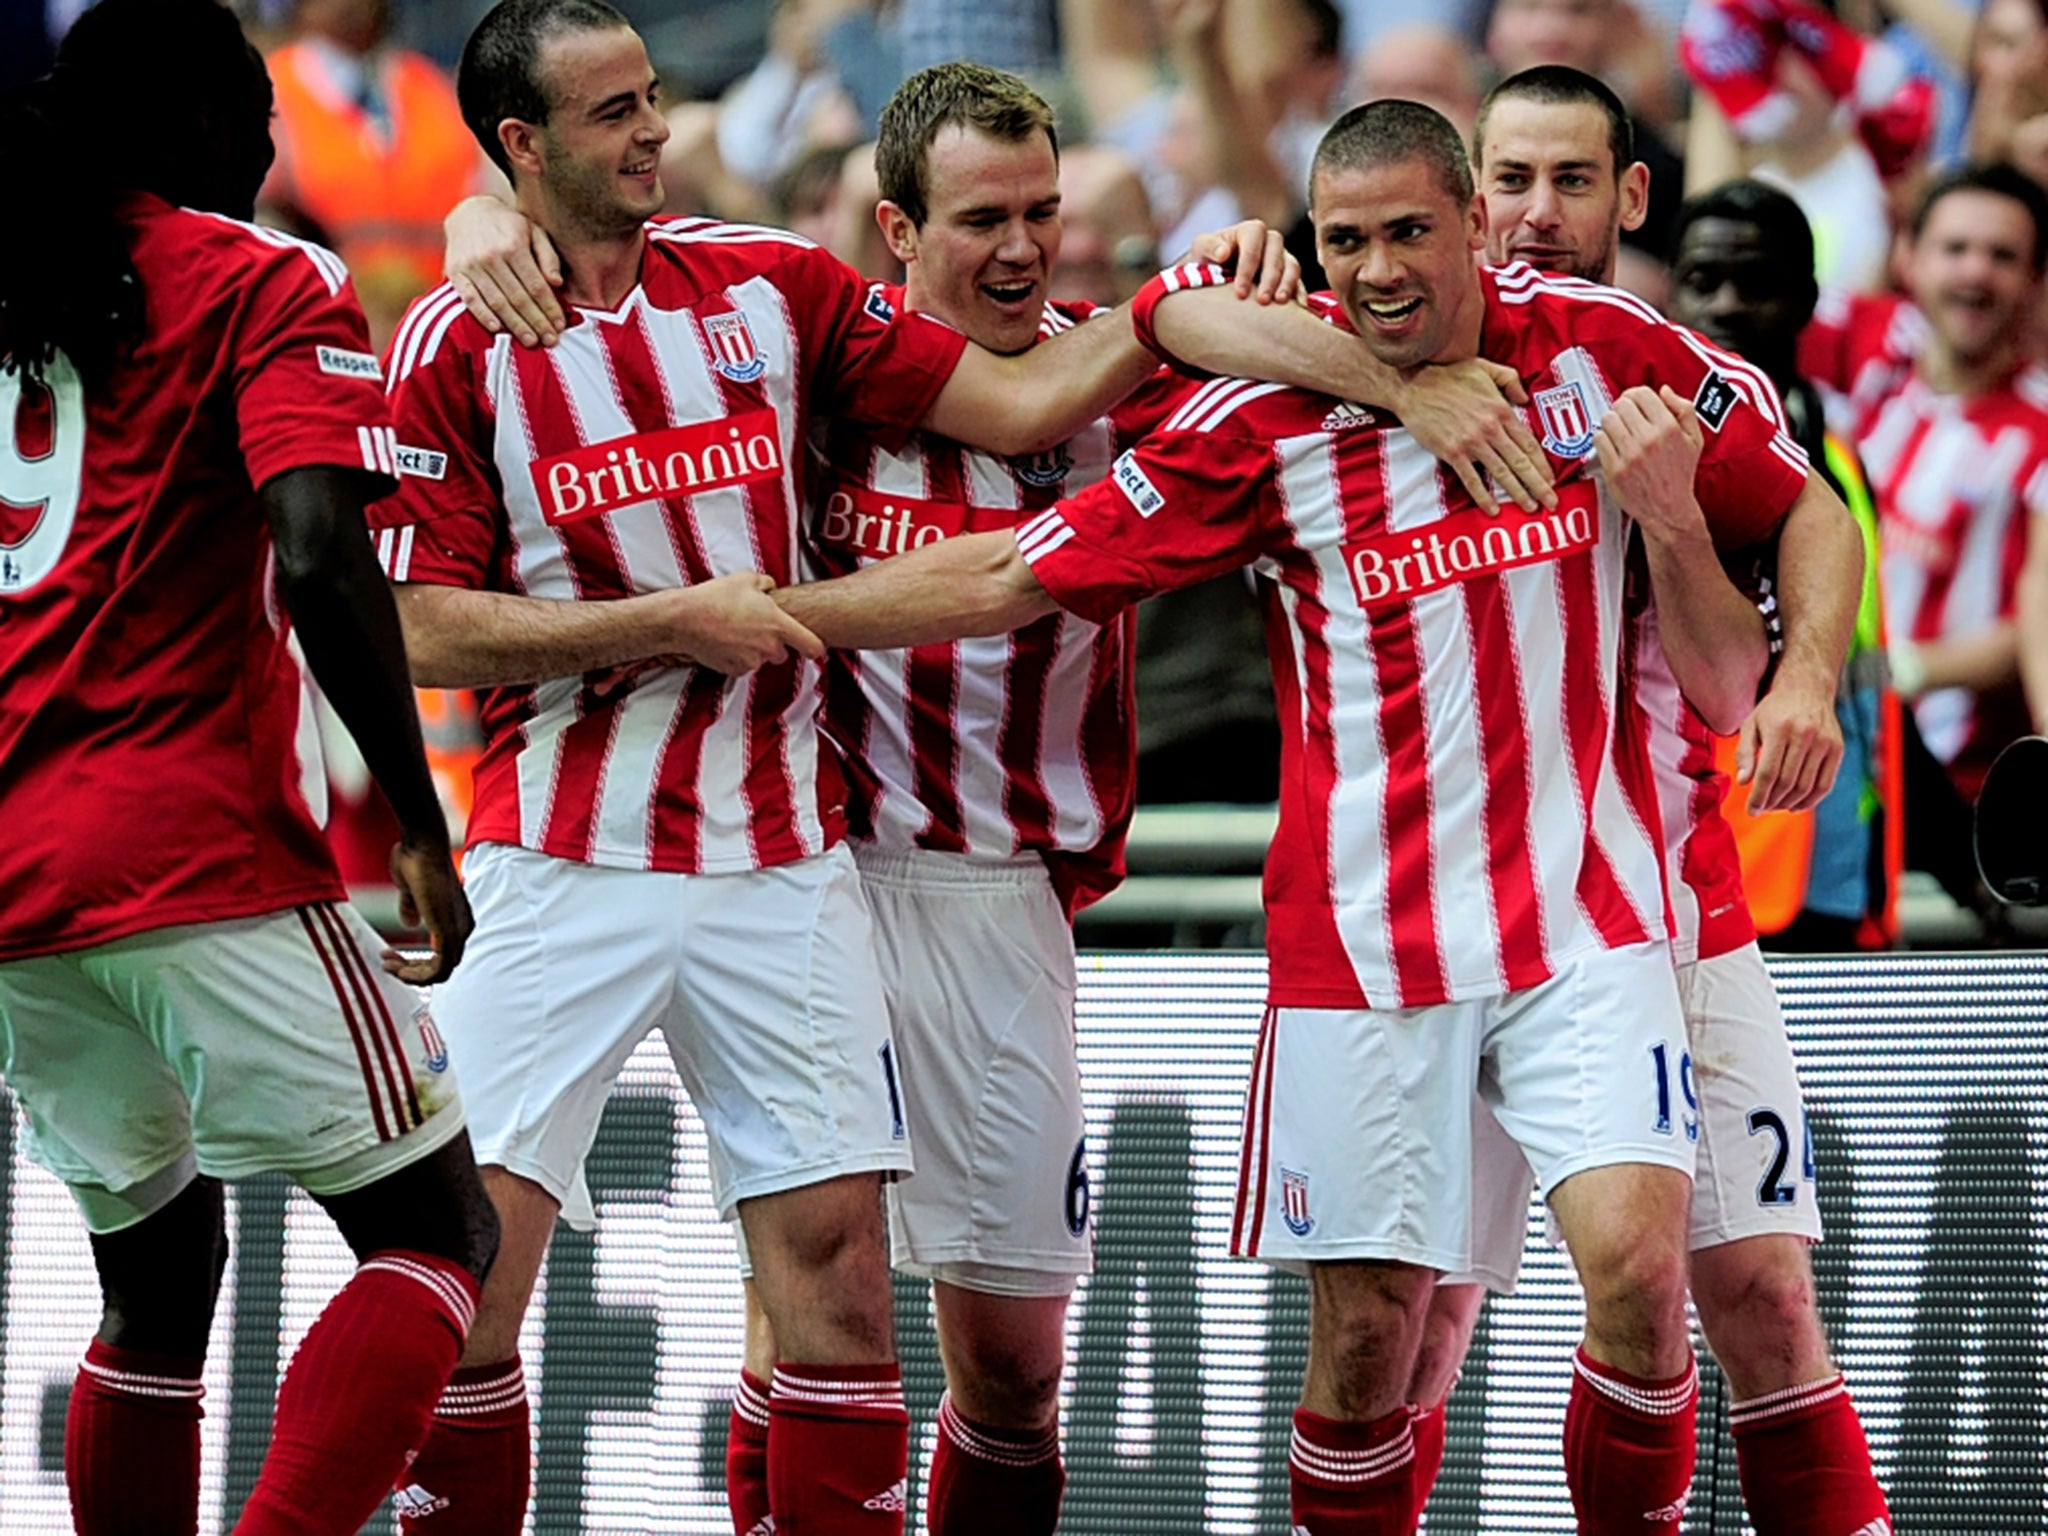 Jonathan Walters (second right) is congratulated after scoring Stoke’s fourth goal in the 5-0 win over Bolton in the FA Cup semi-final at Wembley in 2011